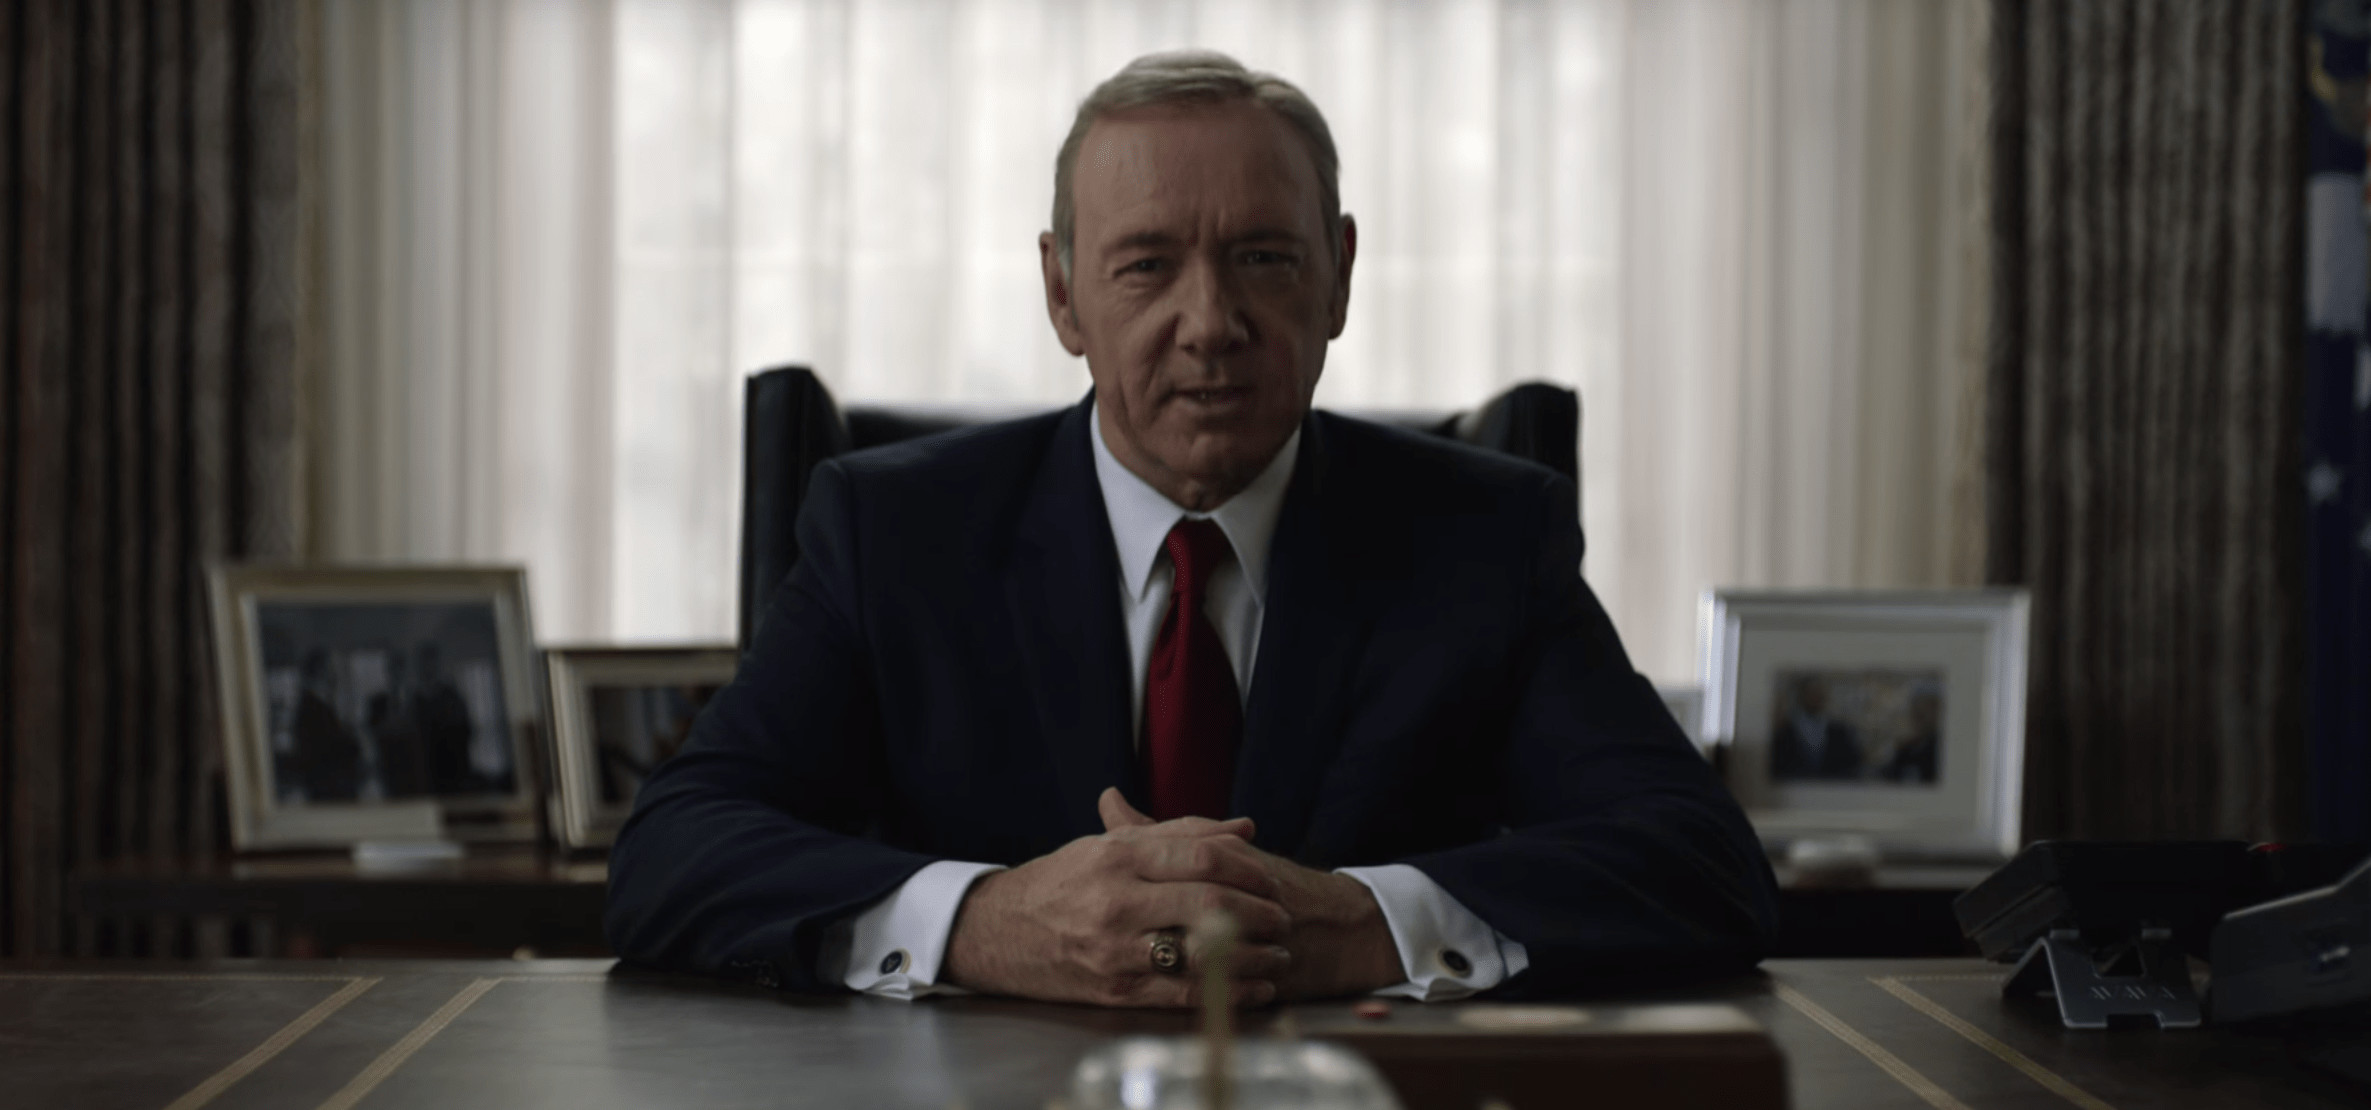 2371x1110 House of Cards Backgrounds House of Cards Wallpaper